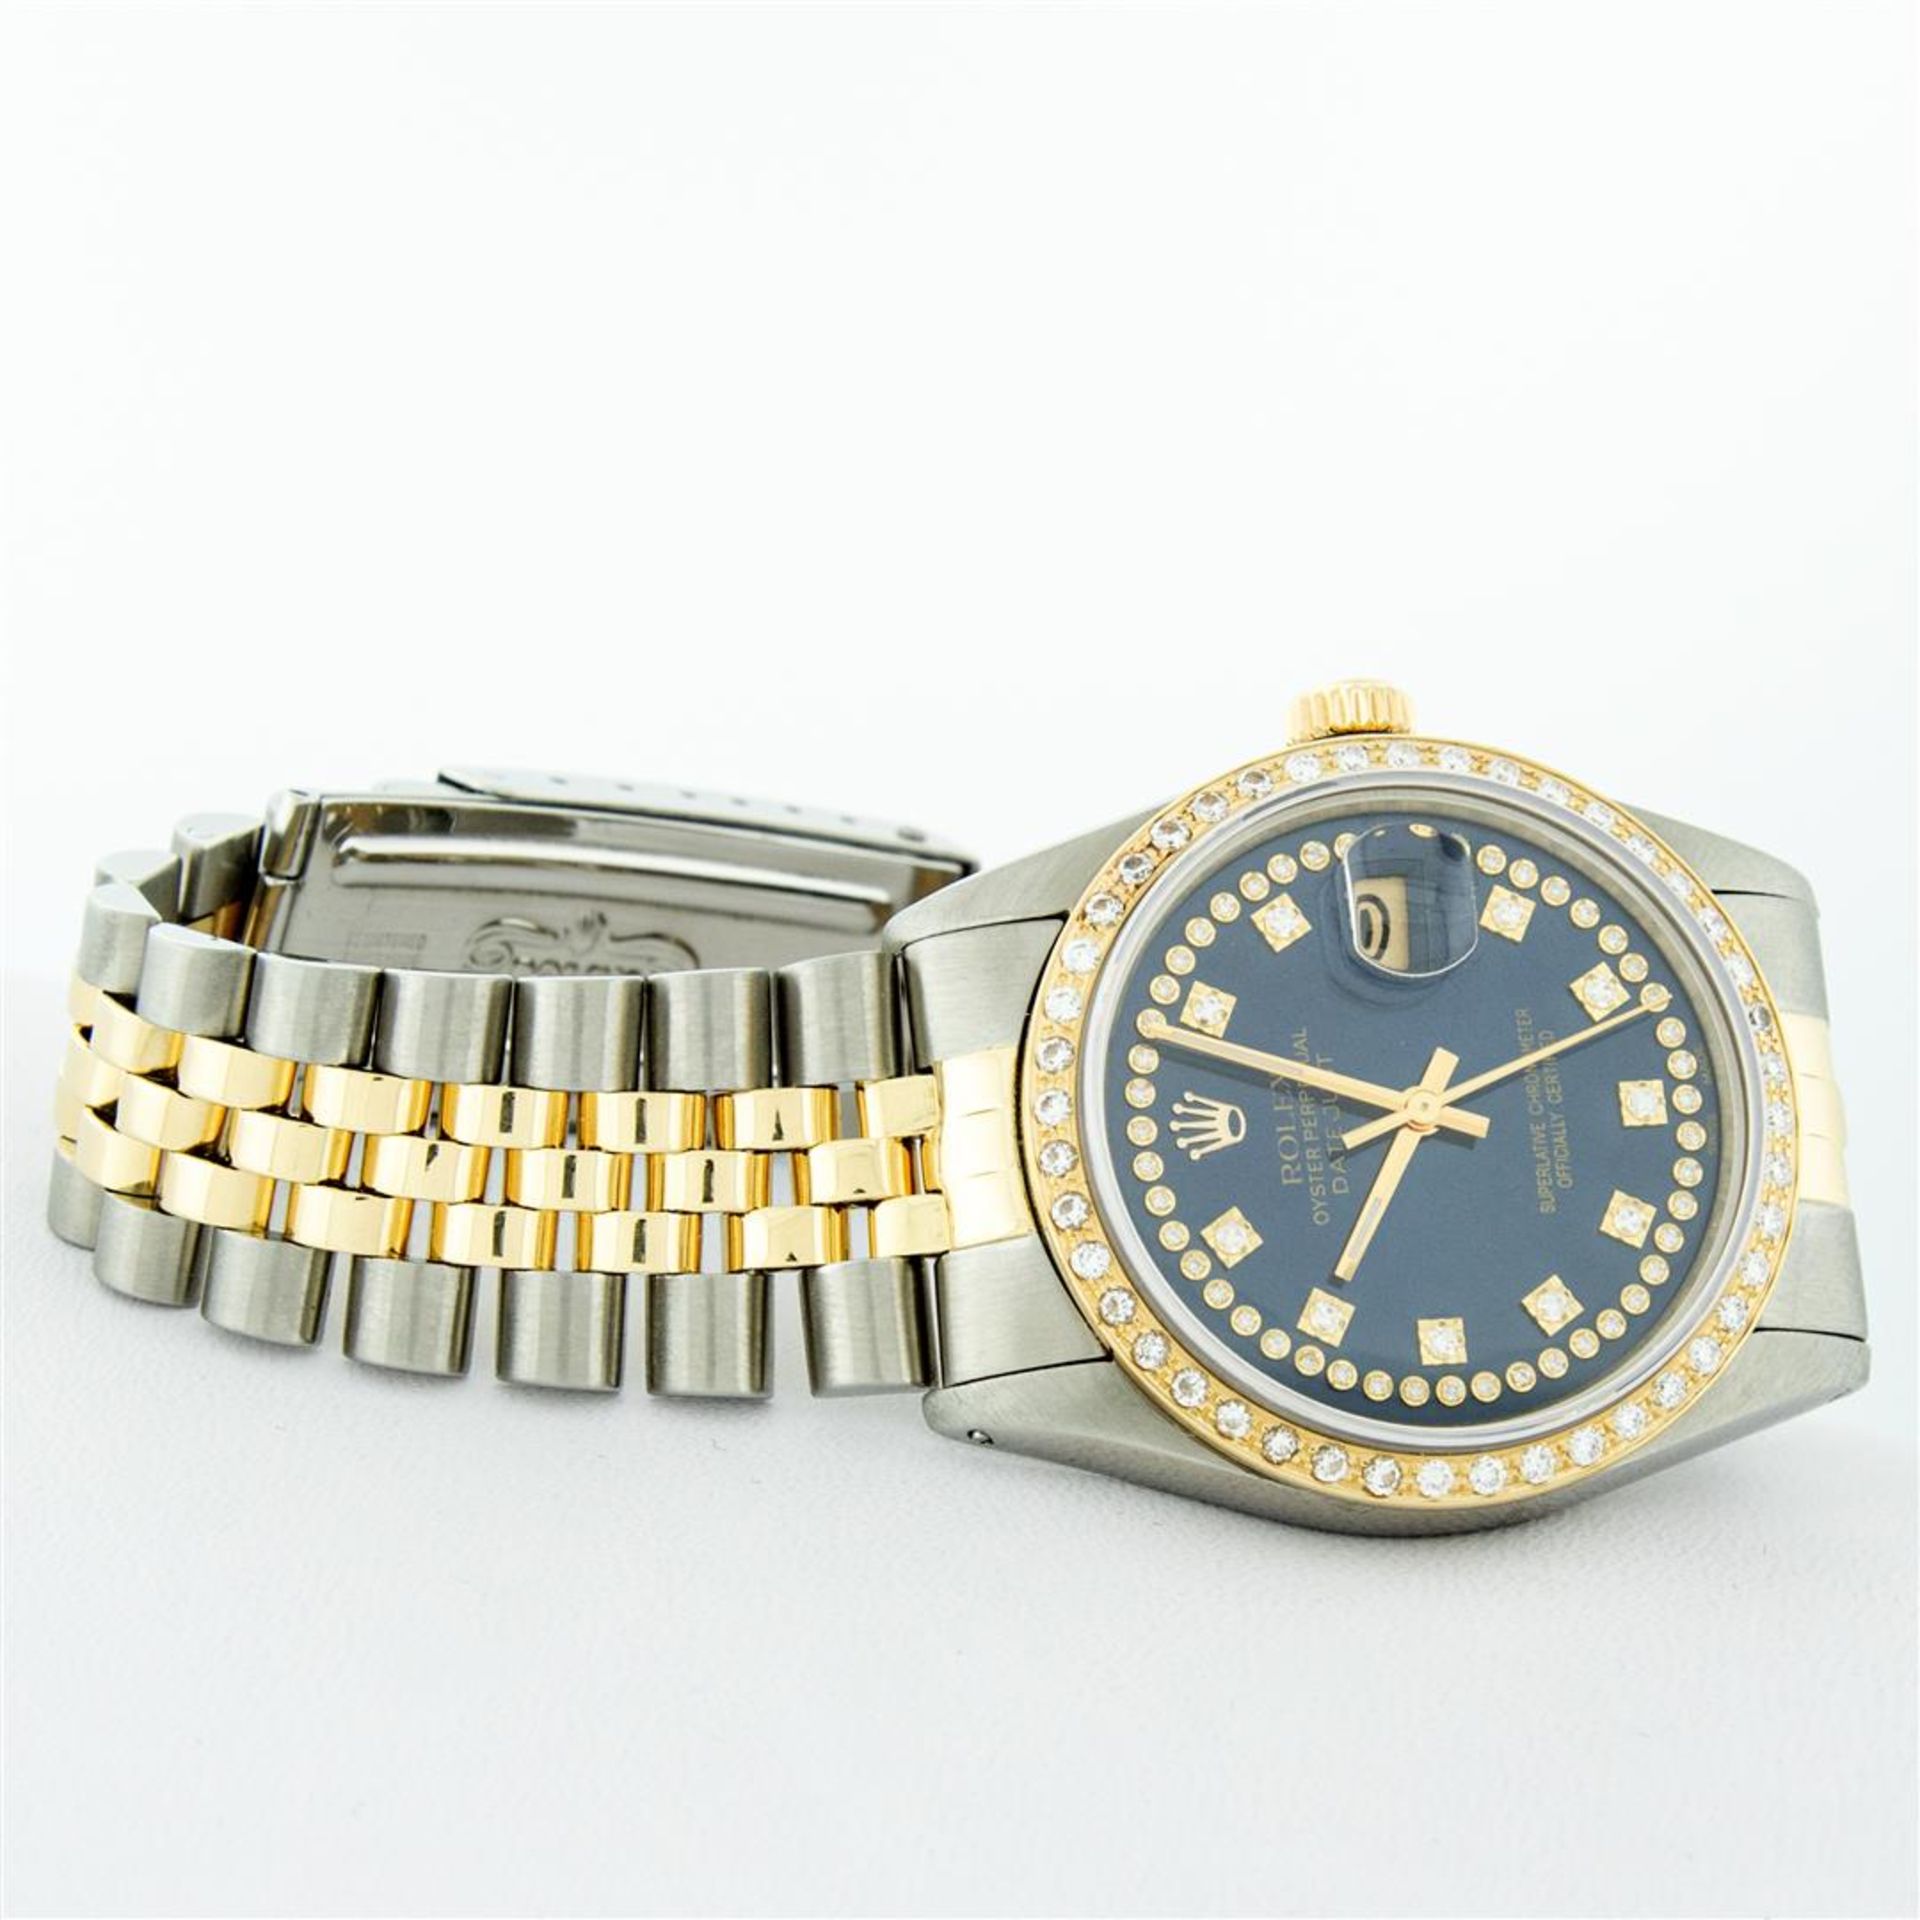 Rolex Mens 2 Tone Blue String VS Diamond Datejust Wristwatch Oyster Perpetual - Image 4 of 9